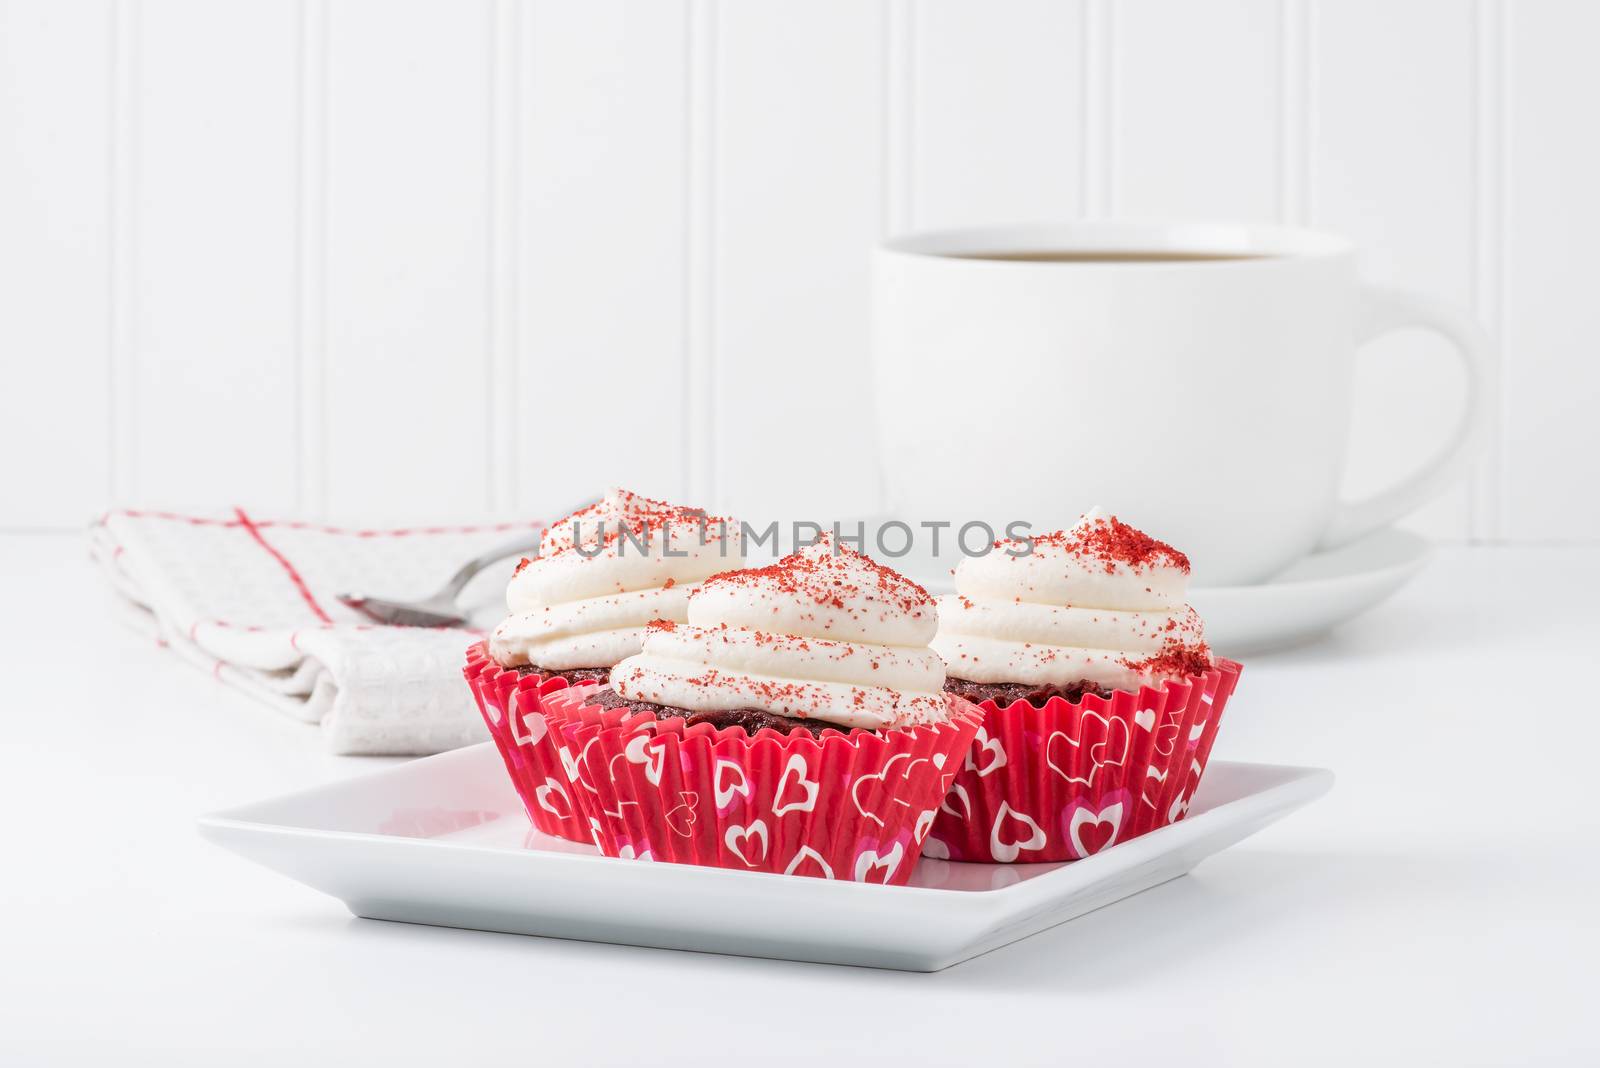 Three red velvet cupcakes served with a cup of coffee.